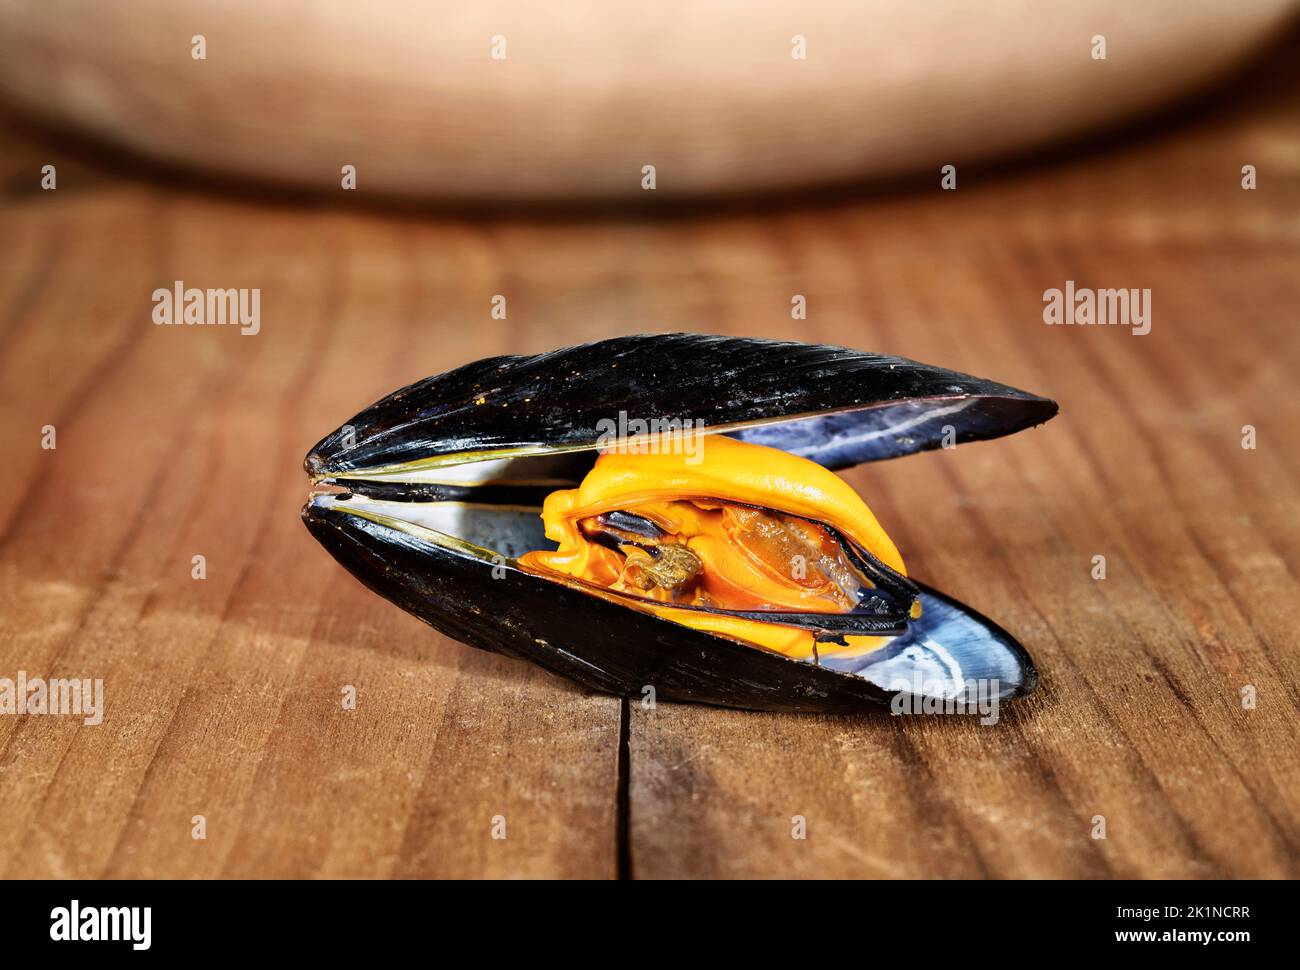 Opened mussel fish on wooden table ,  healthy eating food Stock Photo